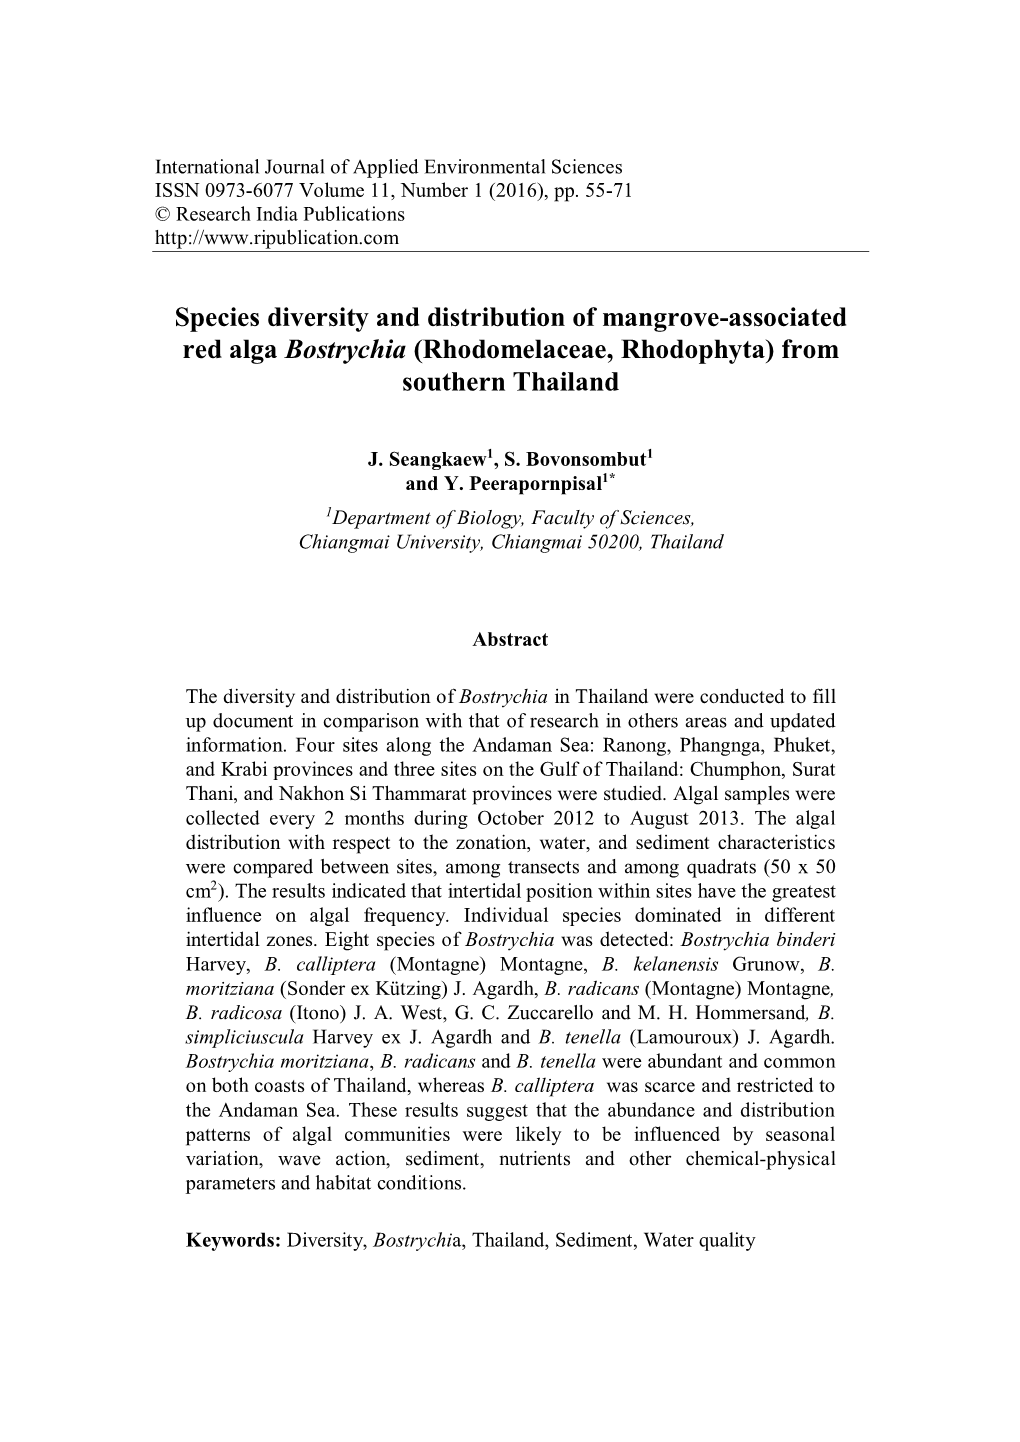 Species Diversity and Distribution of Mangrove-Associated Red Alga Bostrychia (Rhodomelaceae, Rhodophyta) from Southern Thailand